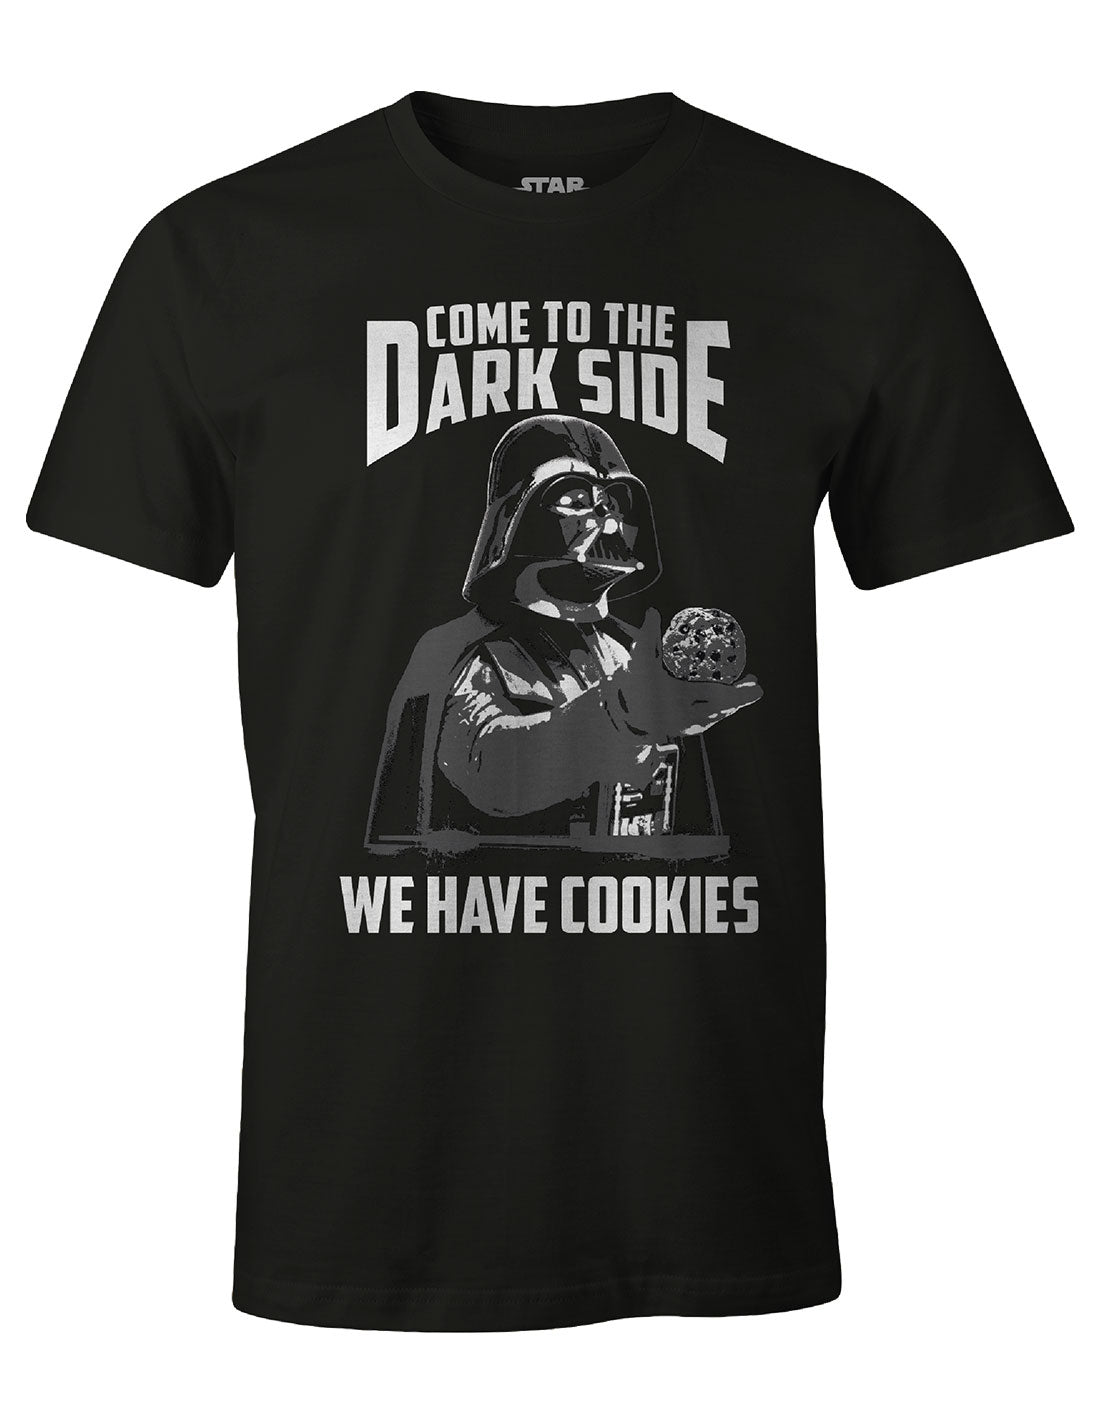 Star Wars T-shirt - We Have Cookies